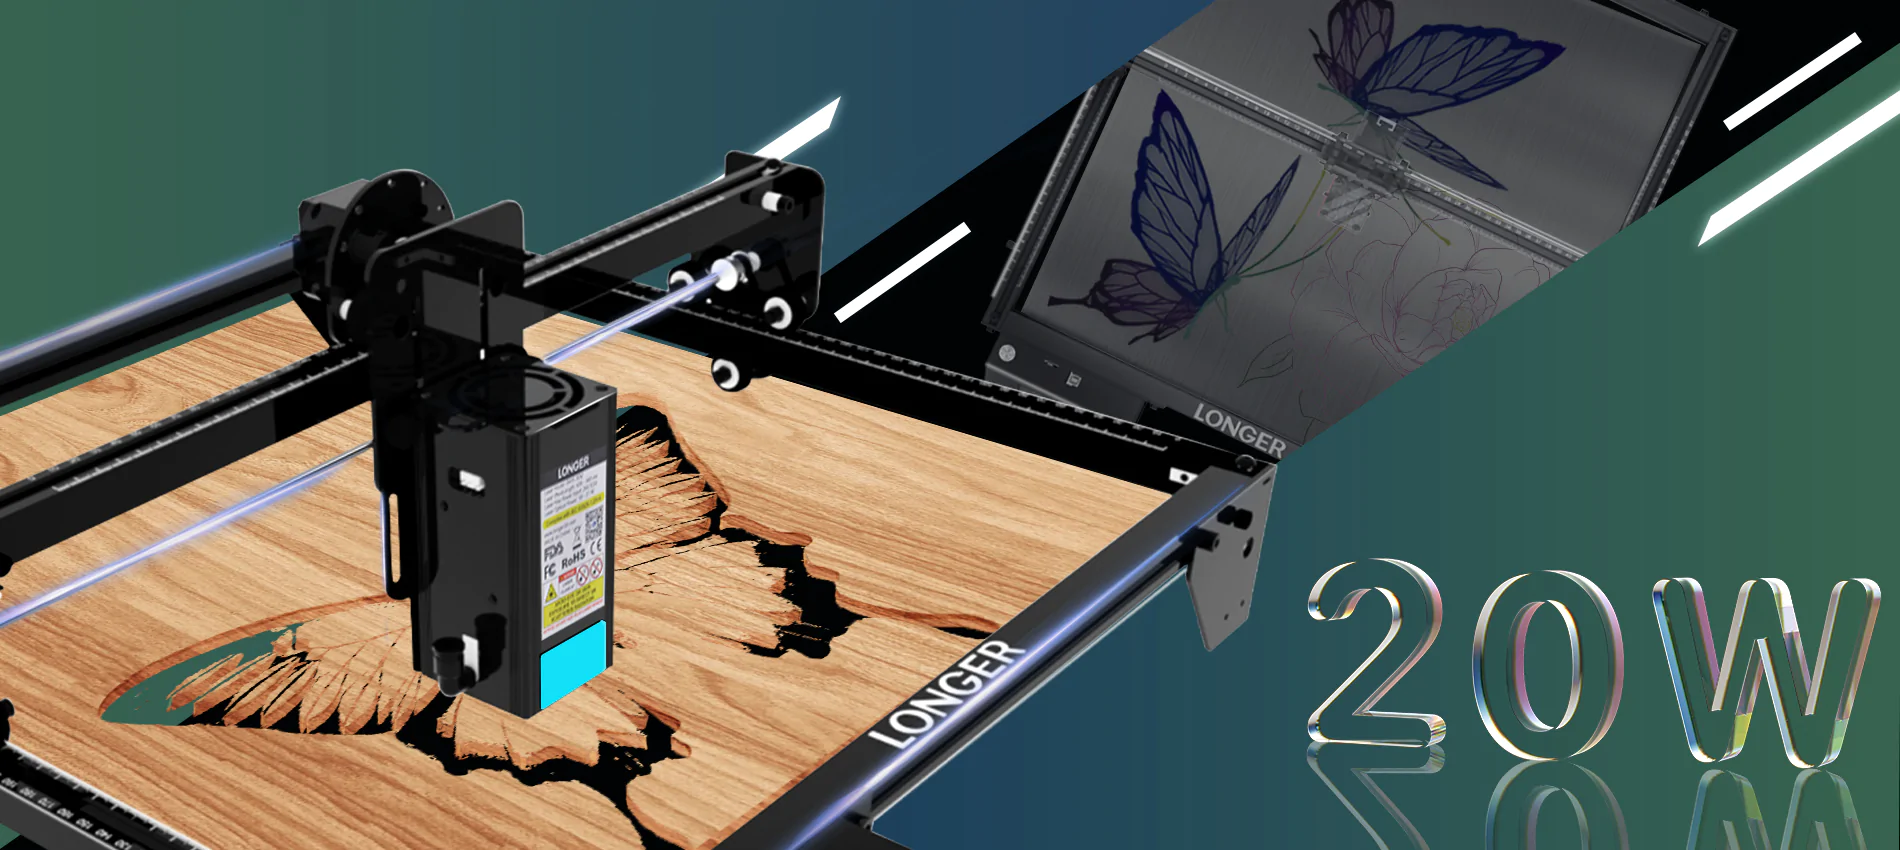 LONGER RAY5 Series - Best Budget Laser Engravers In The Market